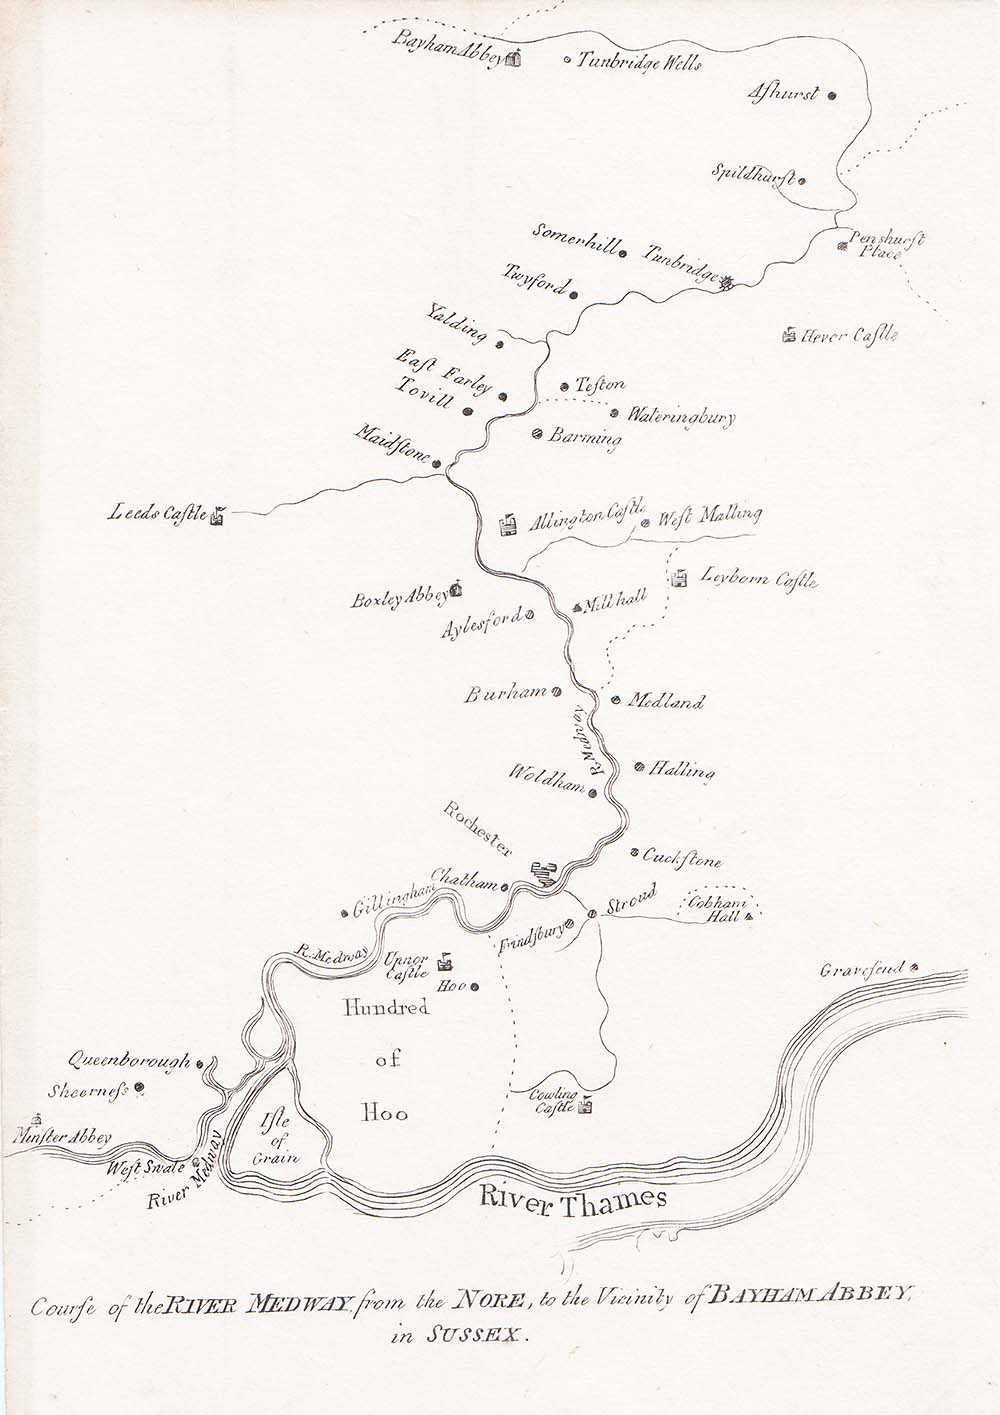 Course of the River Medway 